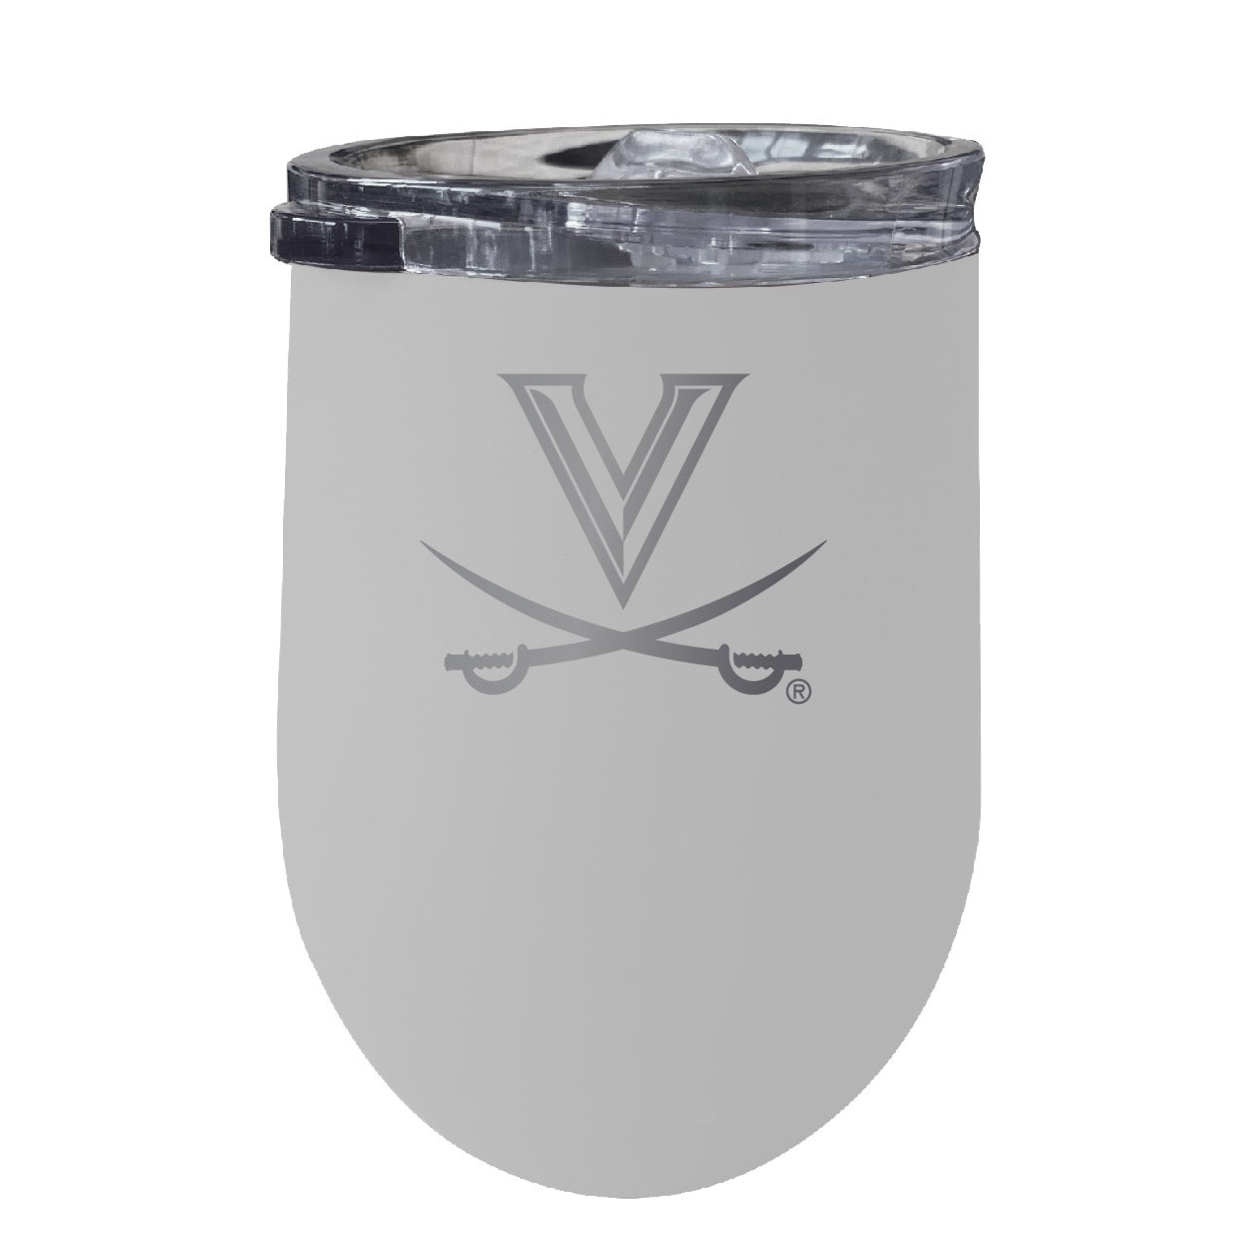 Virginia Cavaliers 12 Oz Etched Insulated Wine Stainless Steel Tumbler - Choose Your Color - White